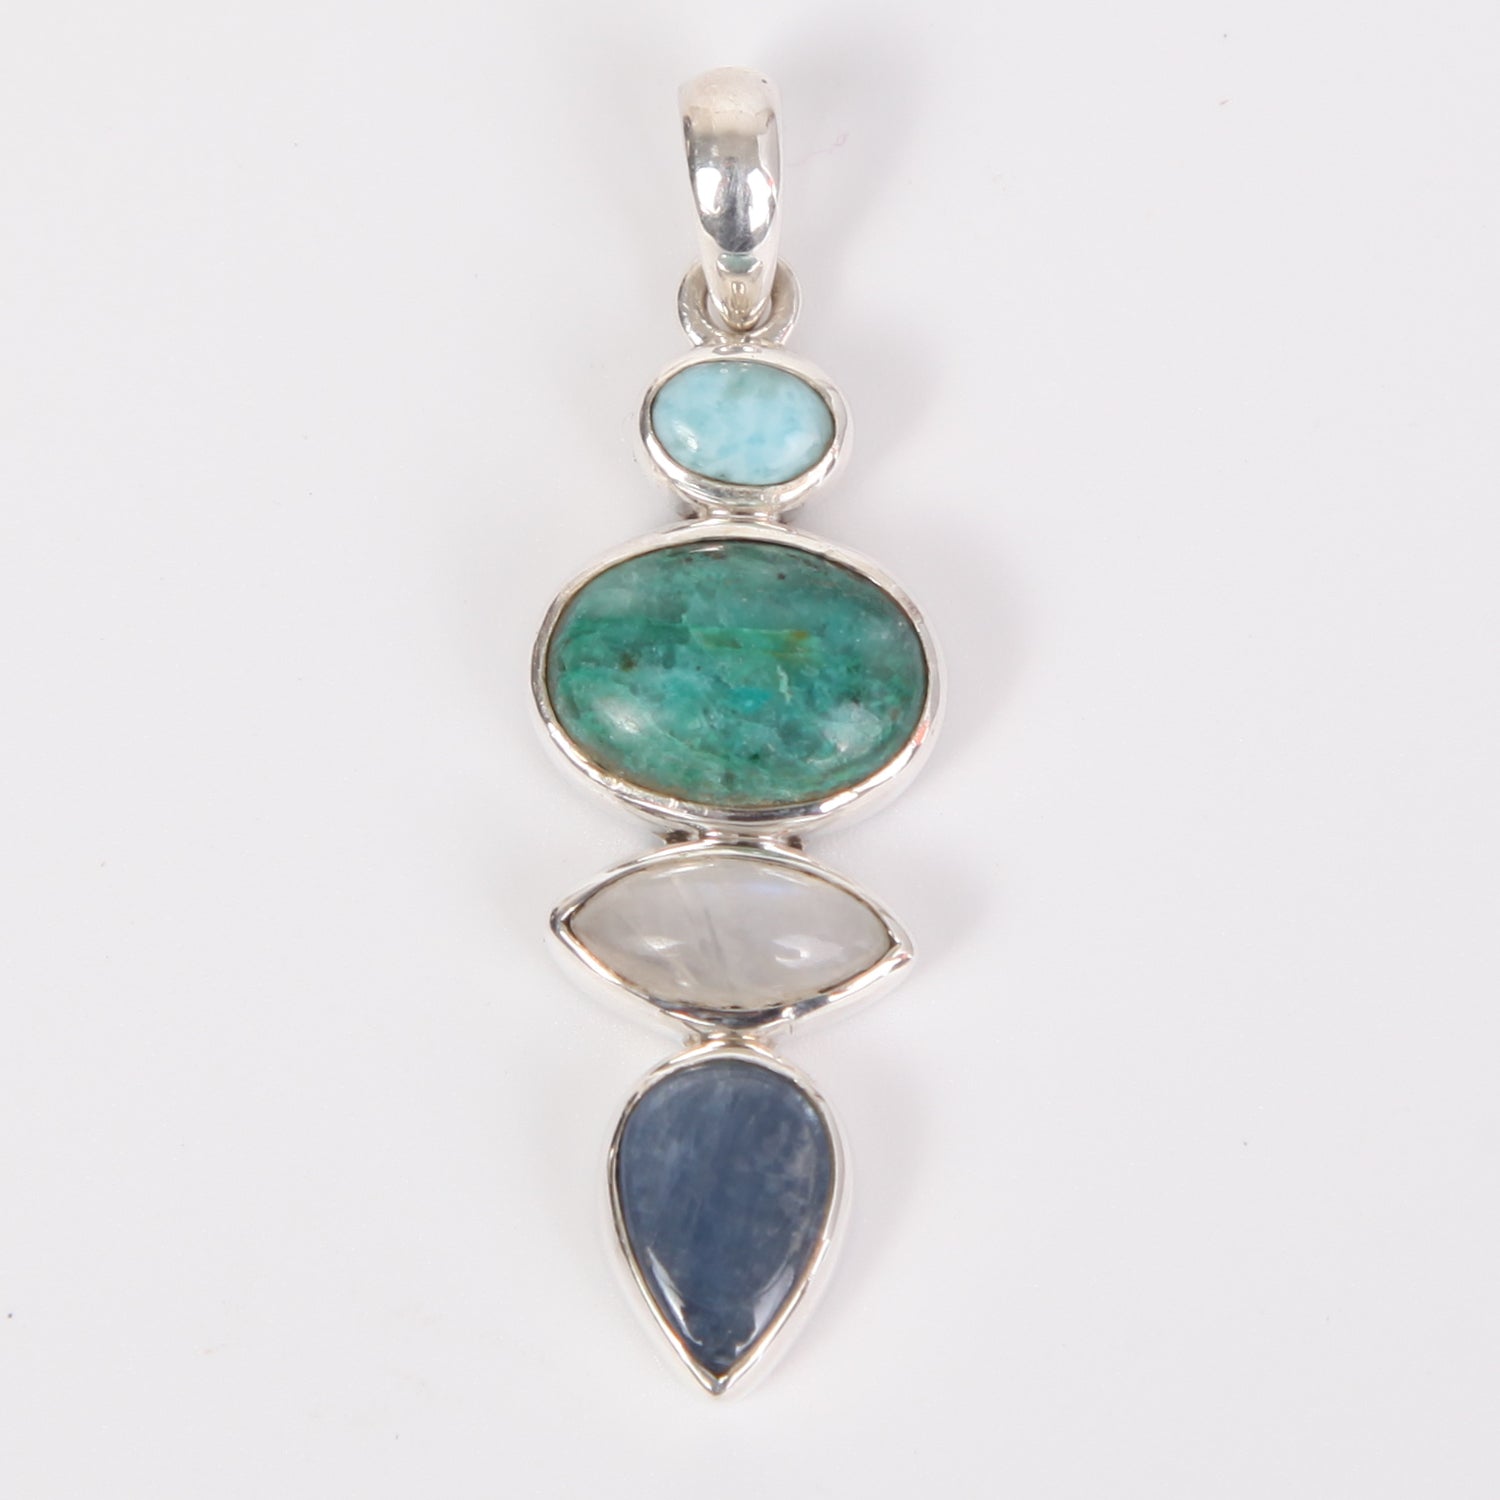 Chrysocolla Sterling Silver Pendant with Larimar Stone, Rainbow Moonstone and Kyanite